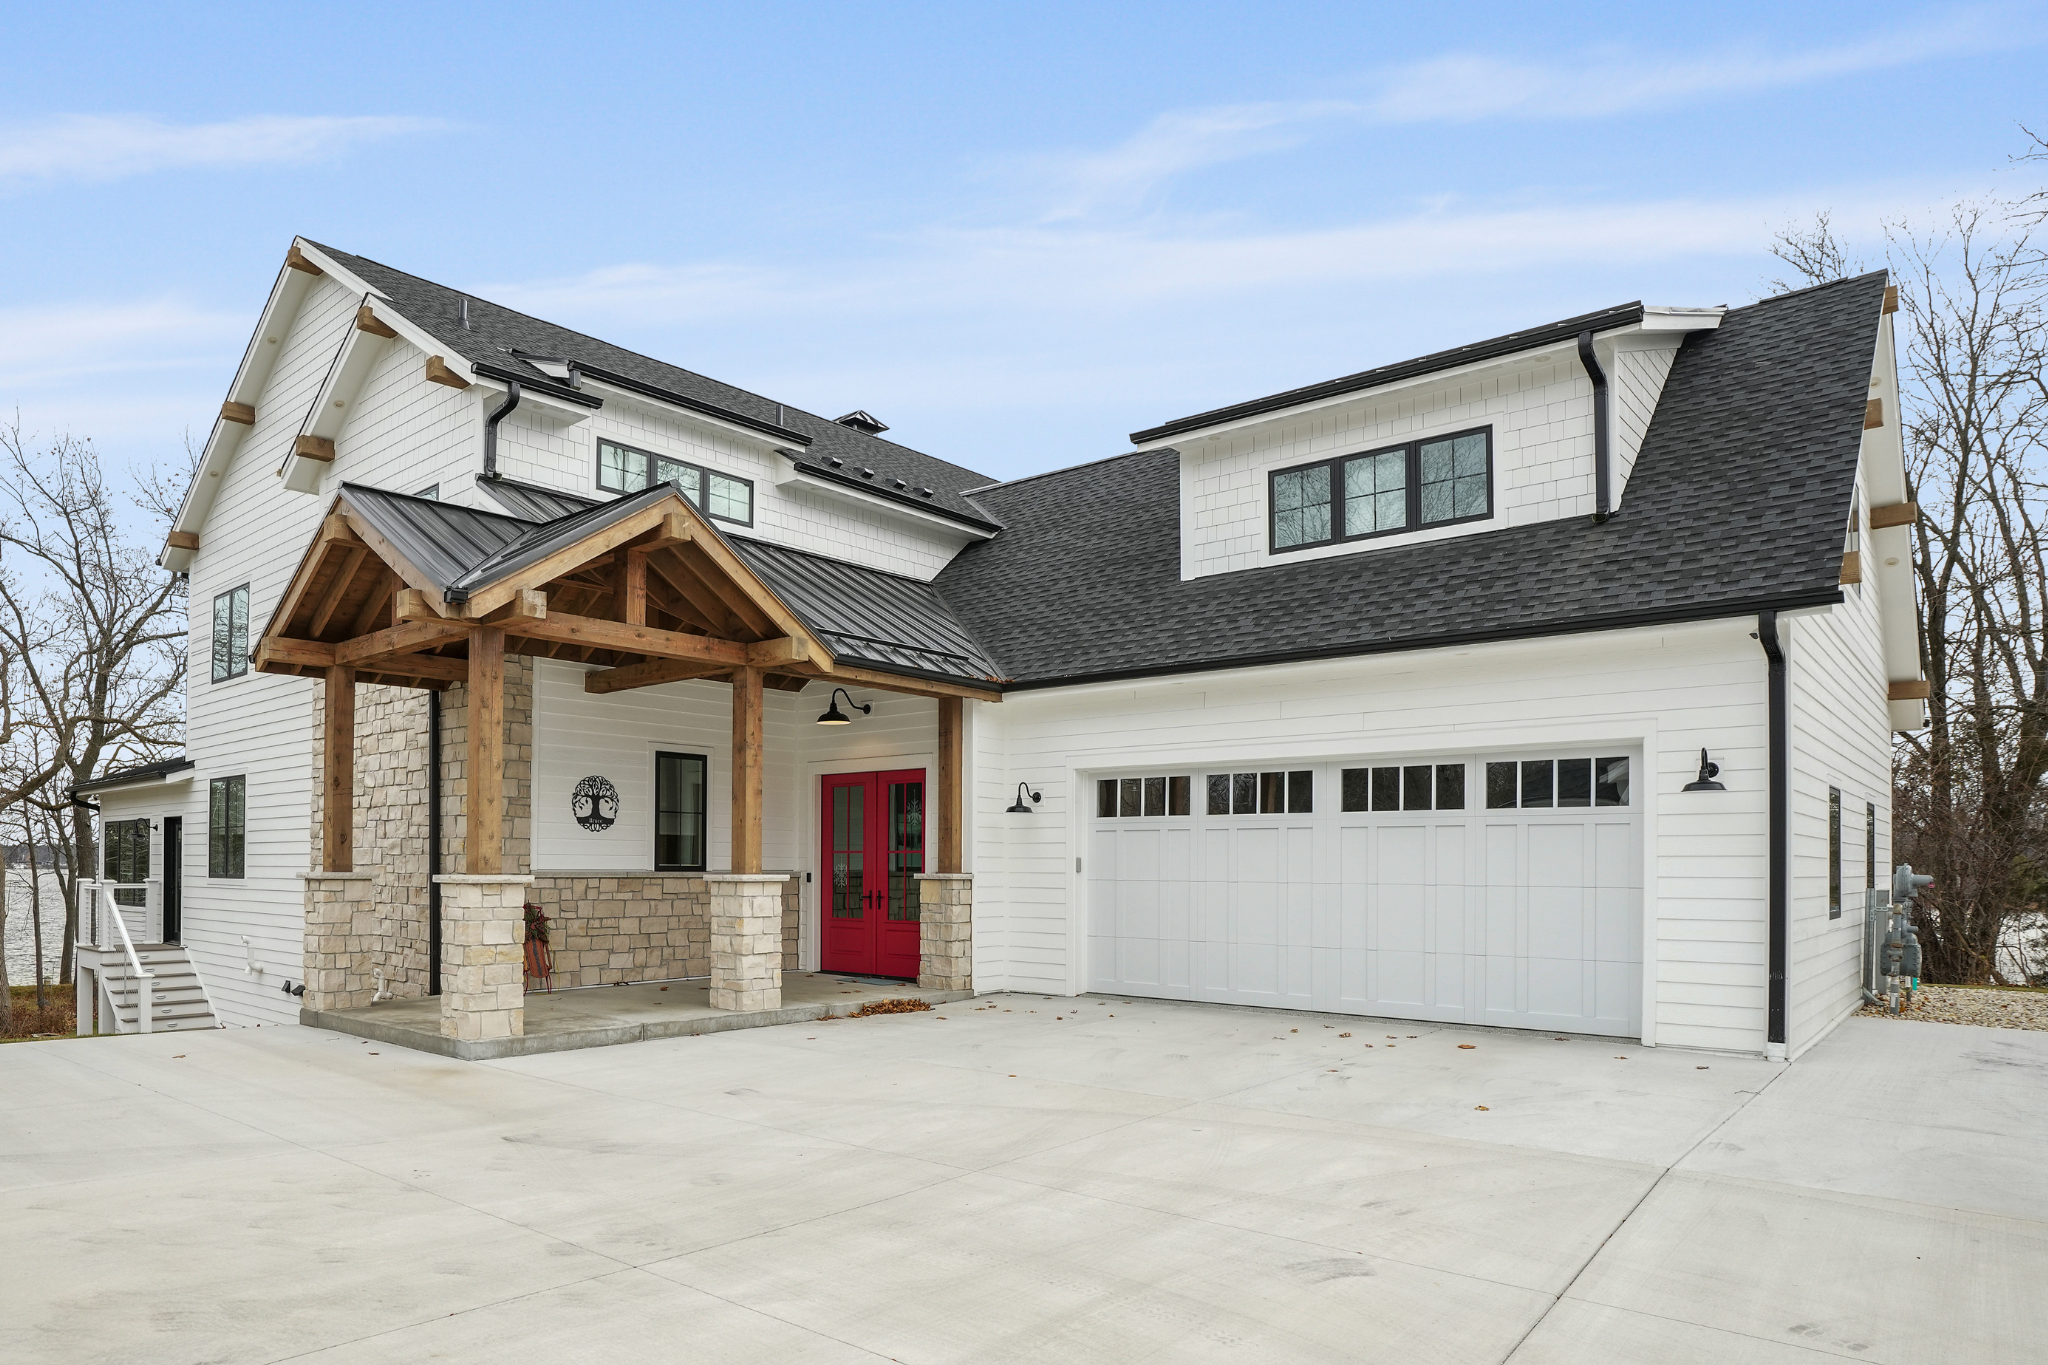 Exterior of a Luxury Custom Home Builder's project with white siding, stone accents, and red front doors.